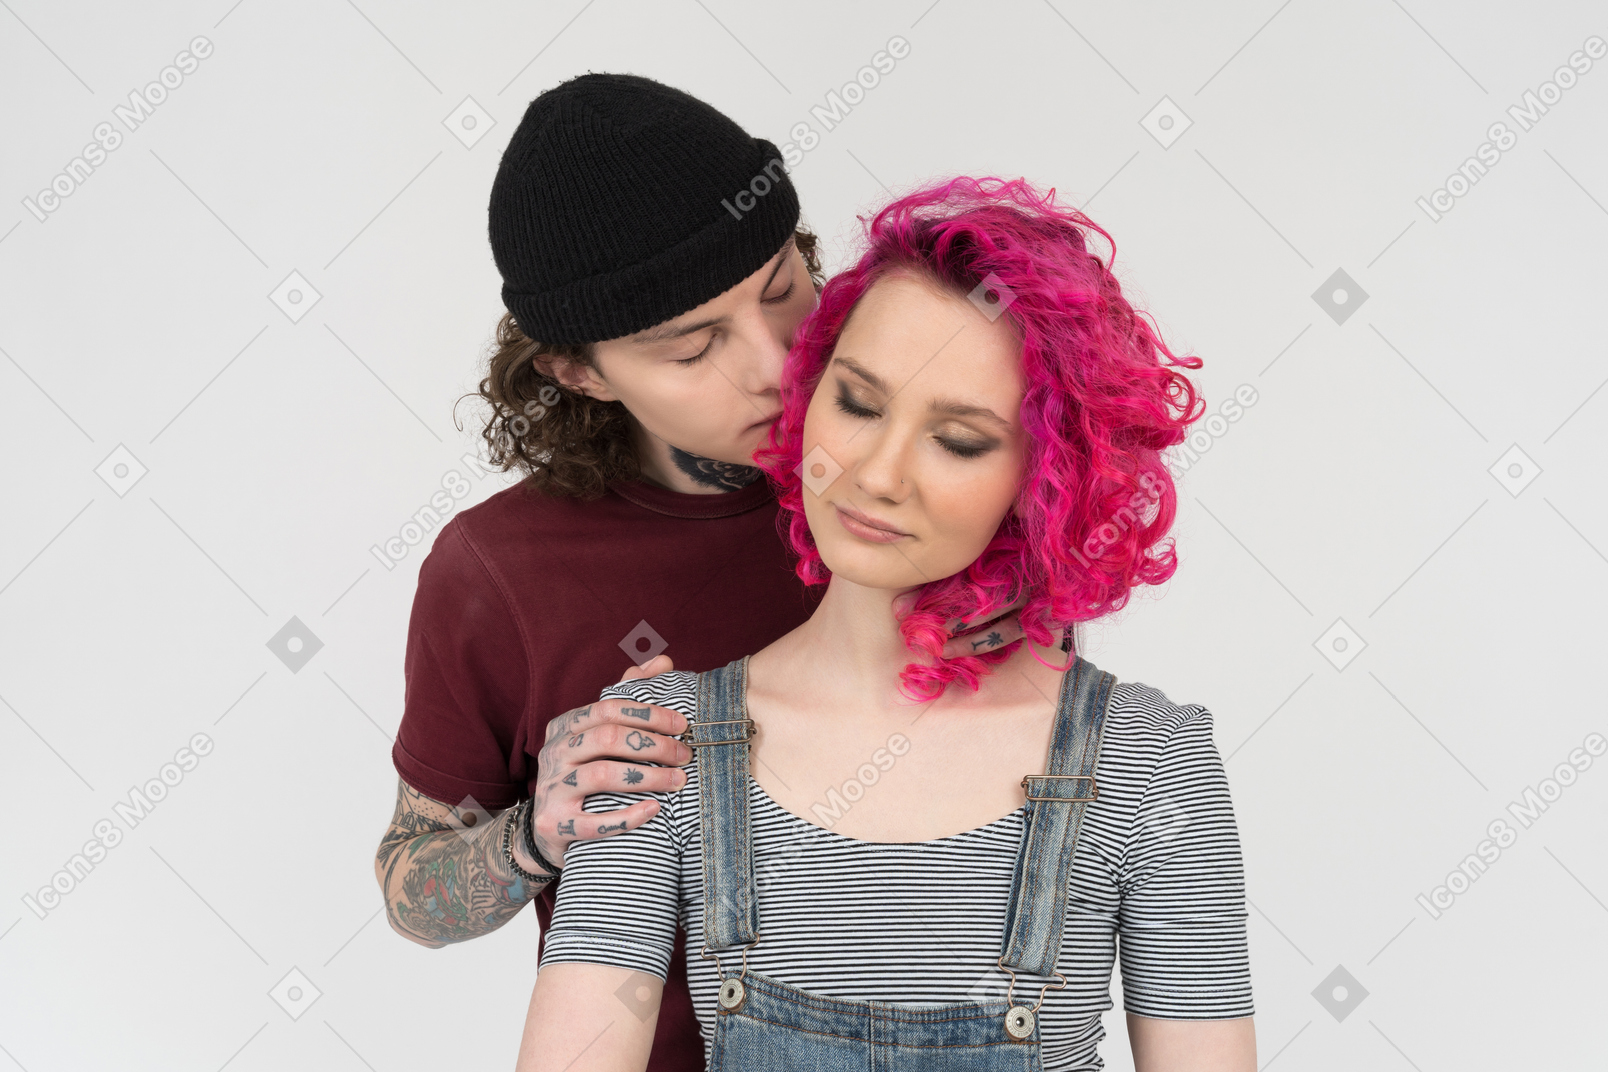 Young man standing behind his girlfriend whispers to her ear